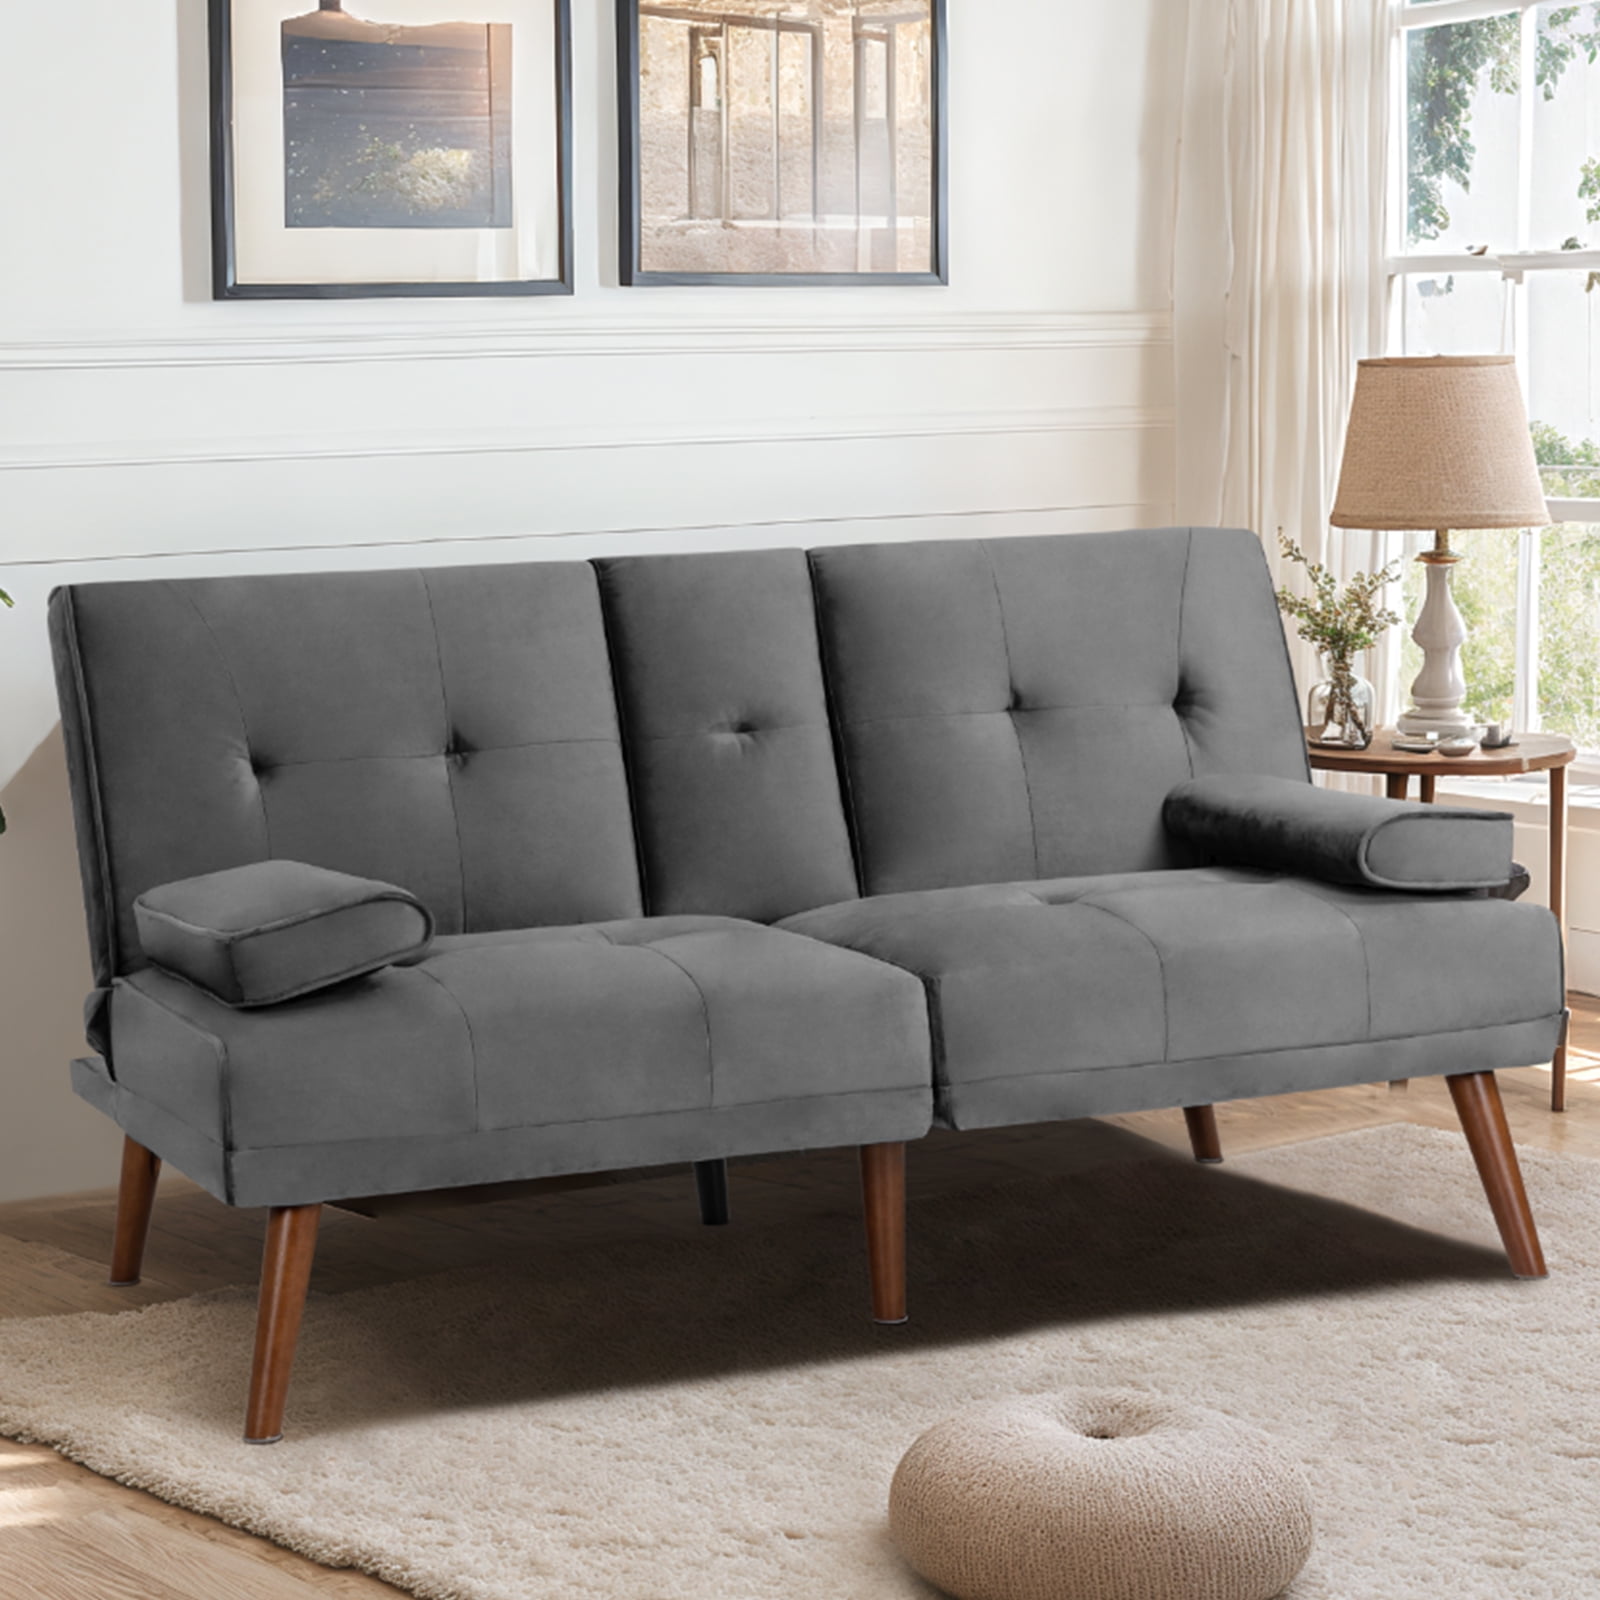 Sobaniilo Sofa Bed Velvet Couch, Loveseat Sofa Bed with Removable Armrests, Adjustable Reliner Guest Bed Daybed for Small Space, Cup 3 Angles, Gray - Walmart.com